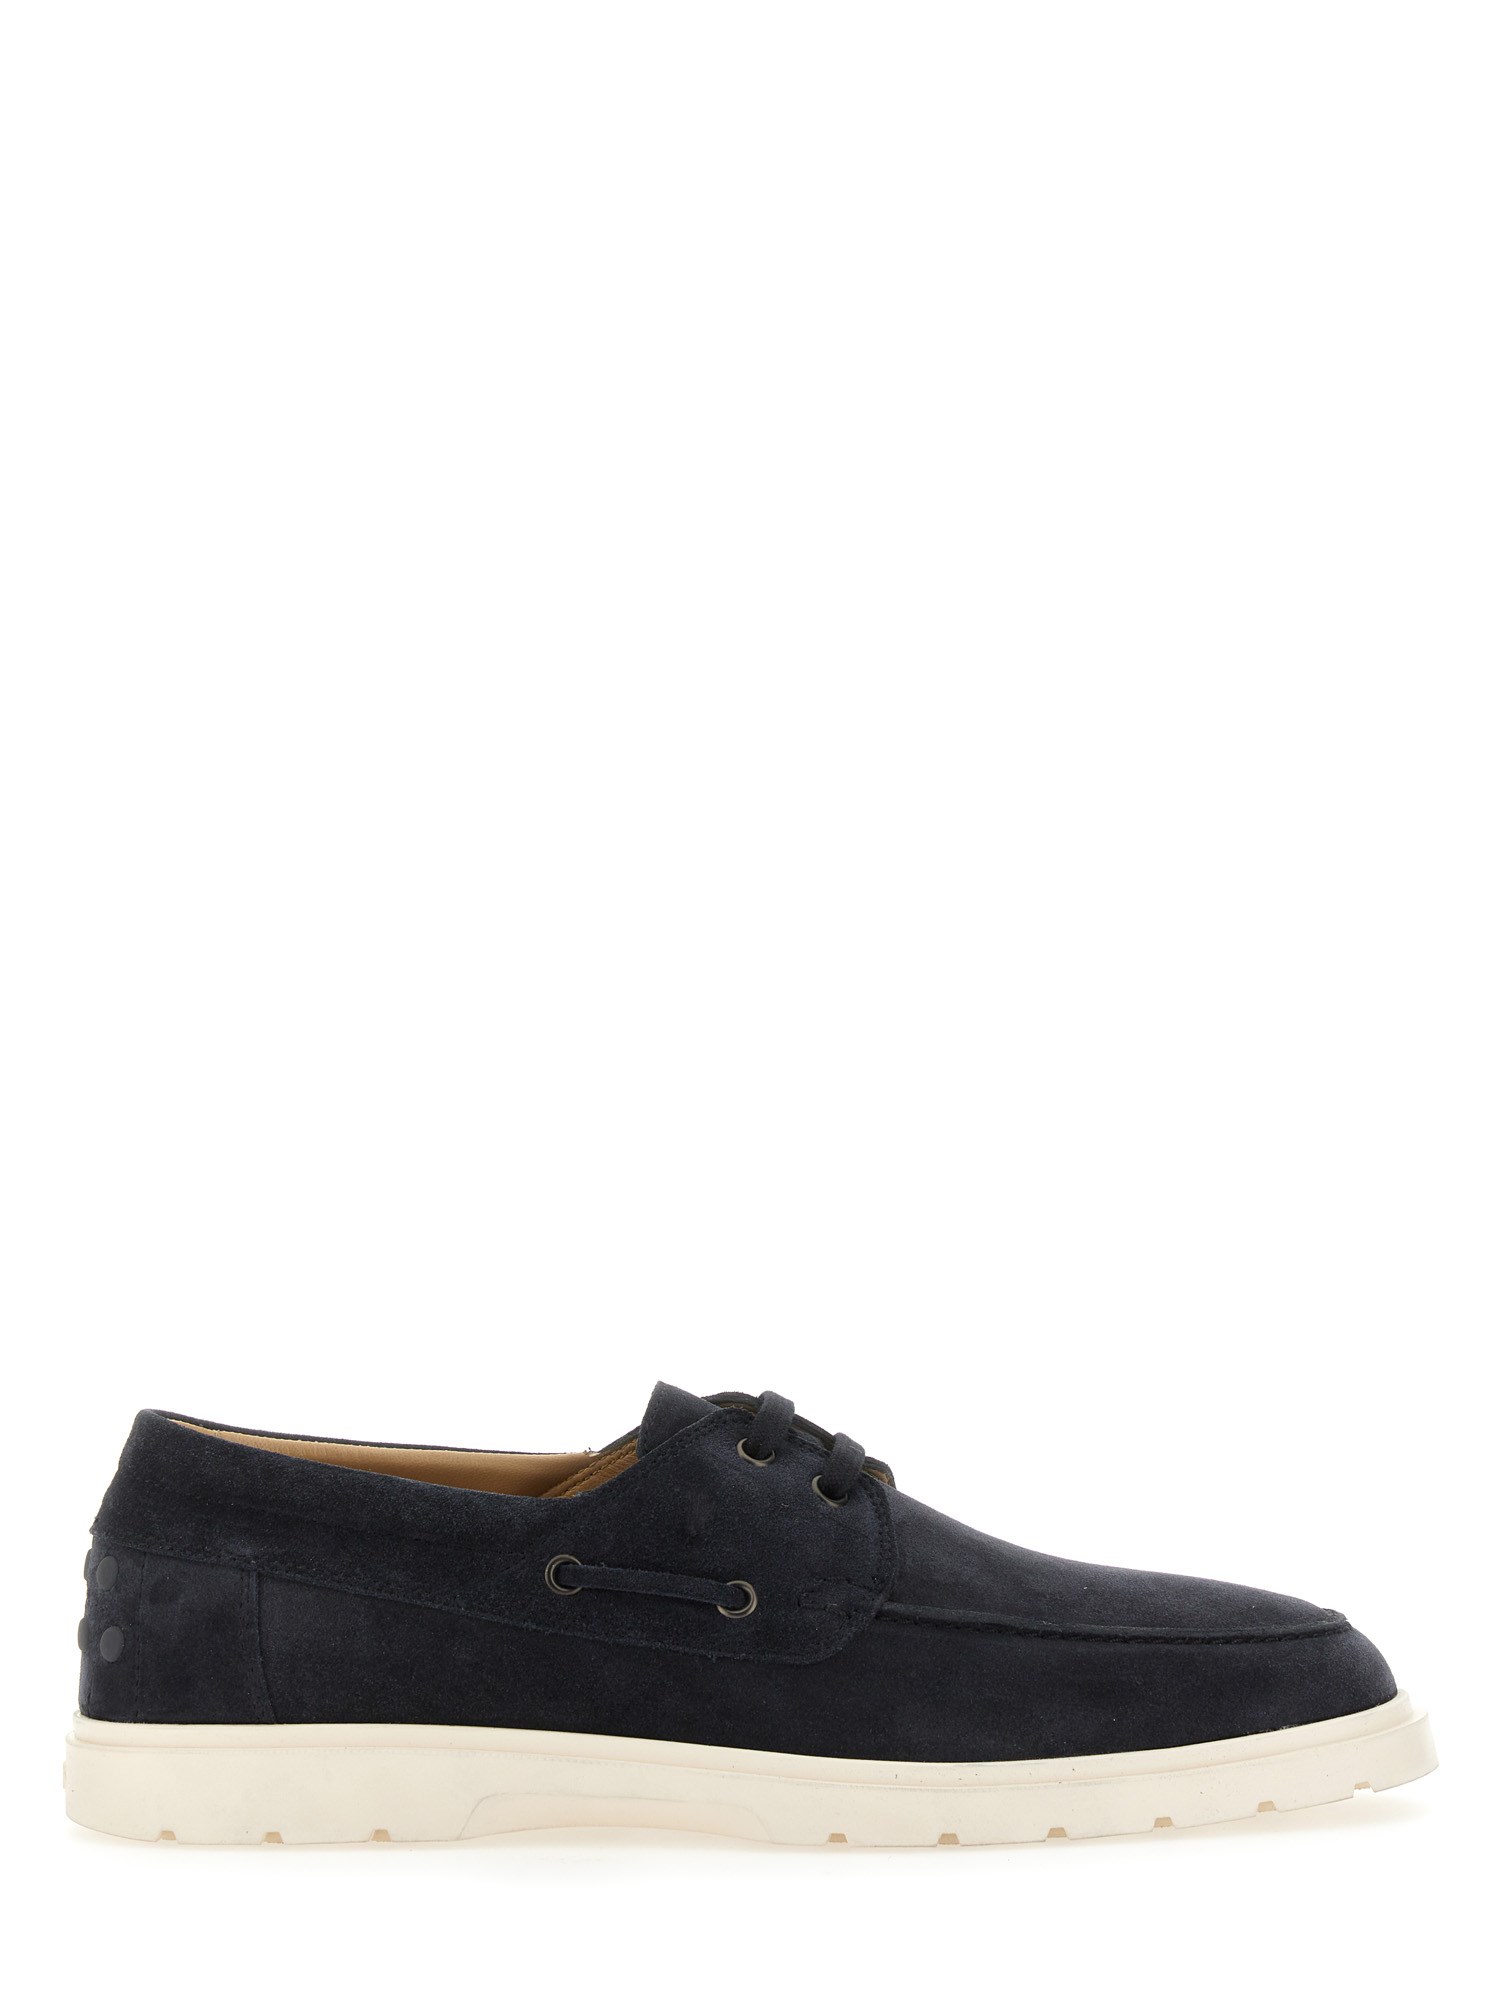 tod's suede loafer